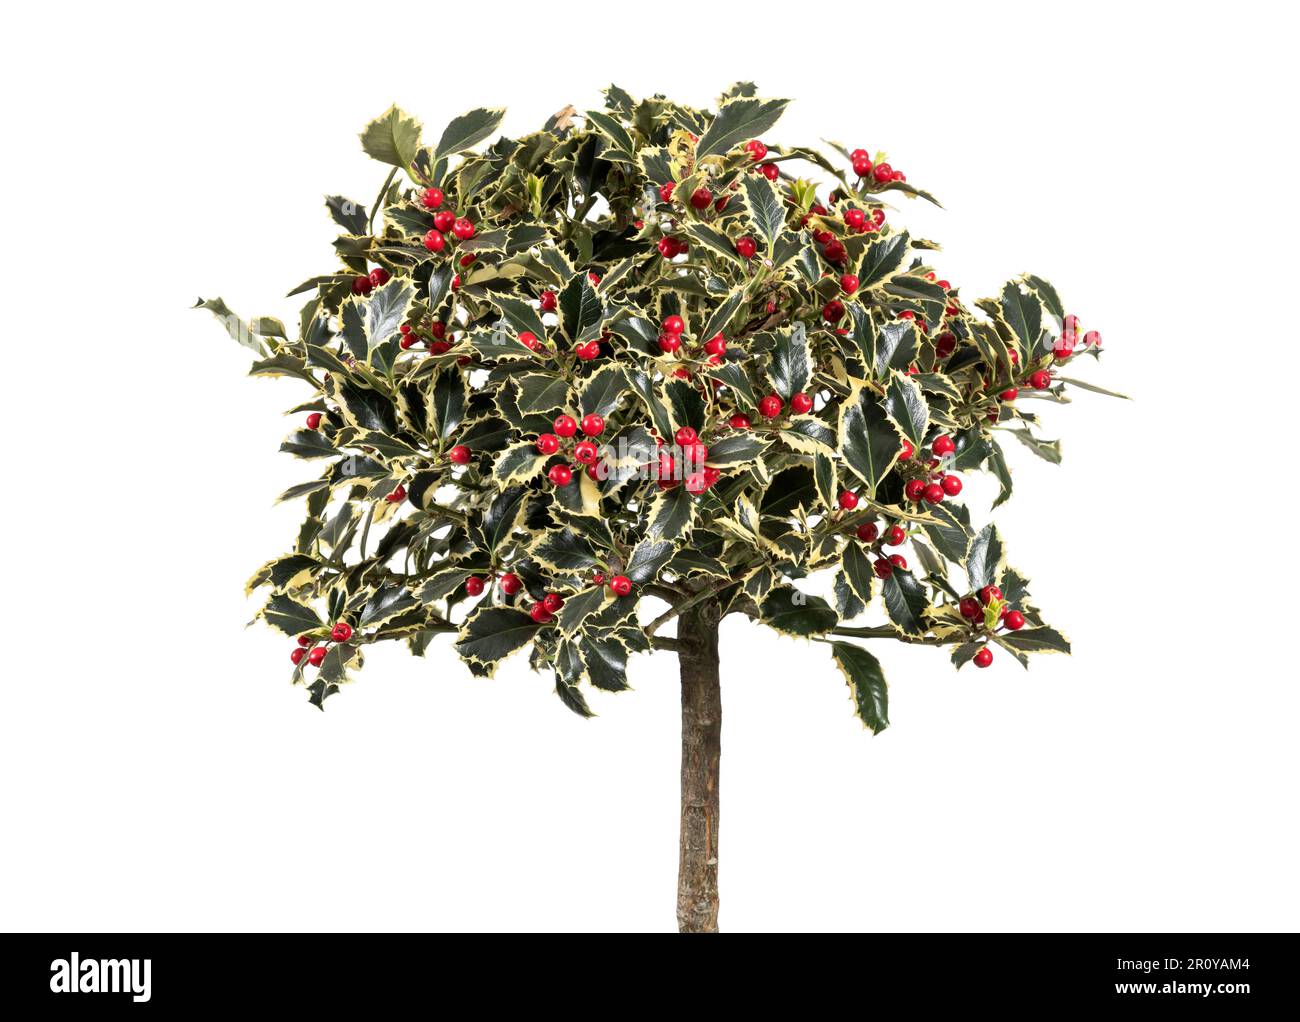 Lush Ilex aquifolium with green leaves and red berries with straight trunk against blank background in studio Stock Photo